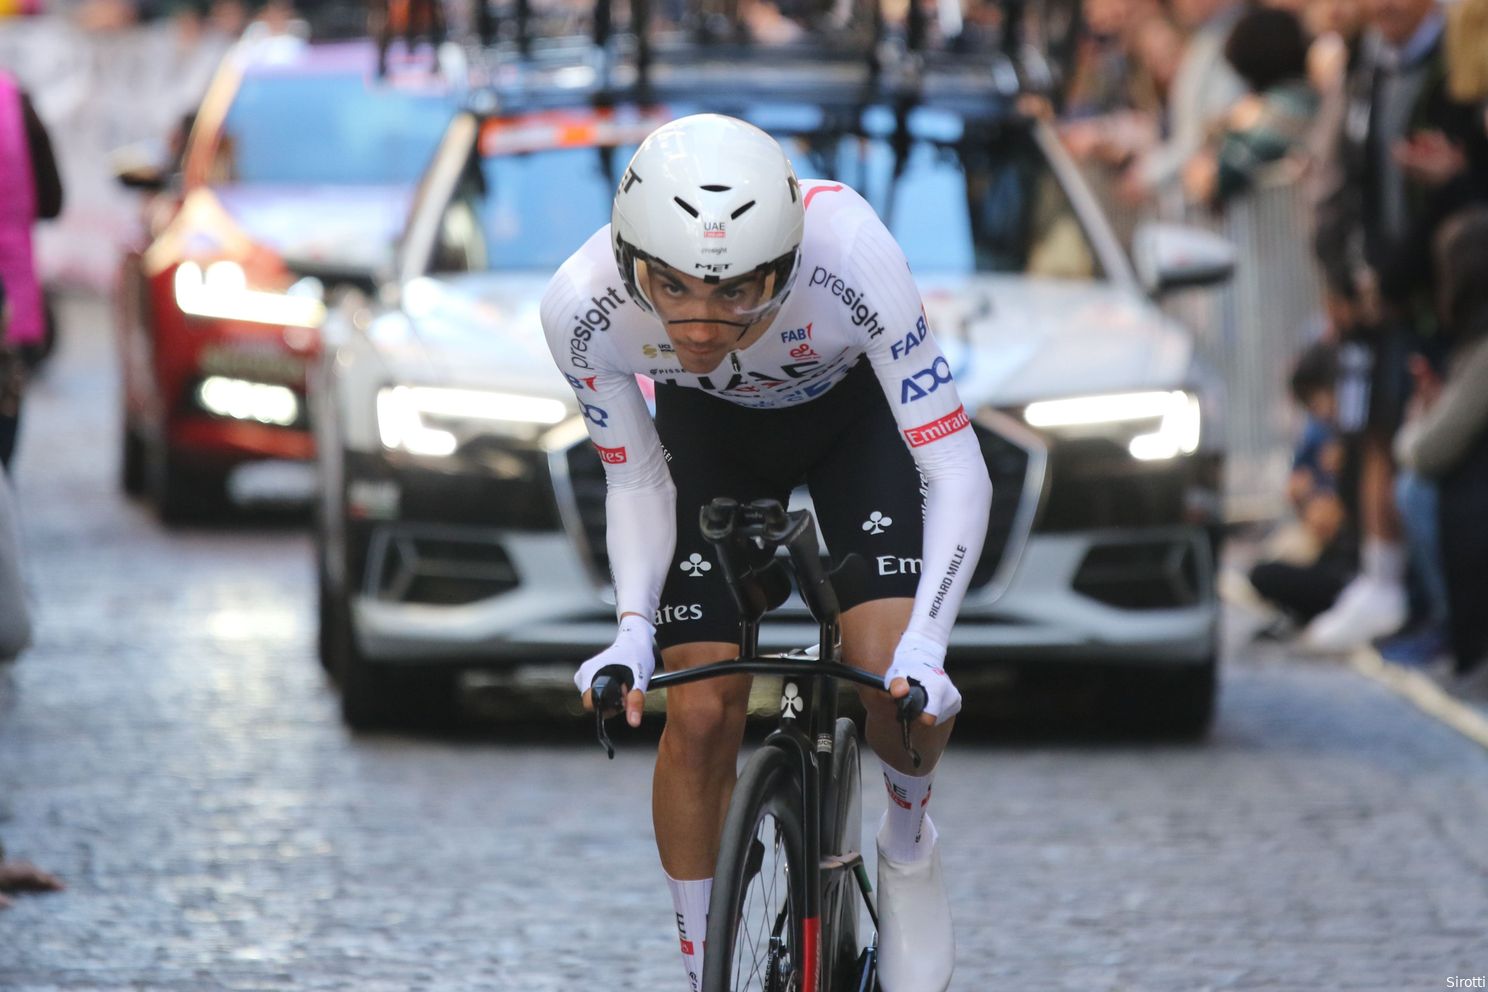 Favorites for stage 3 in the Tour of Romandie | New time trial test, but this time among the big guns